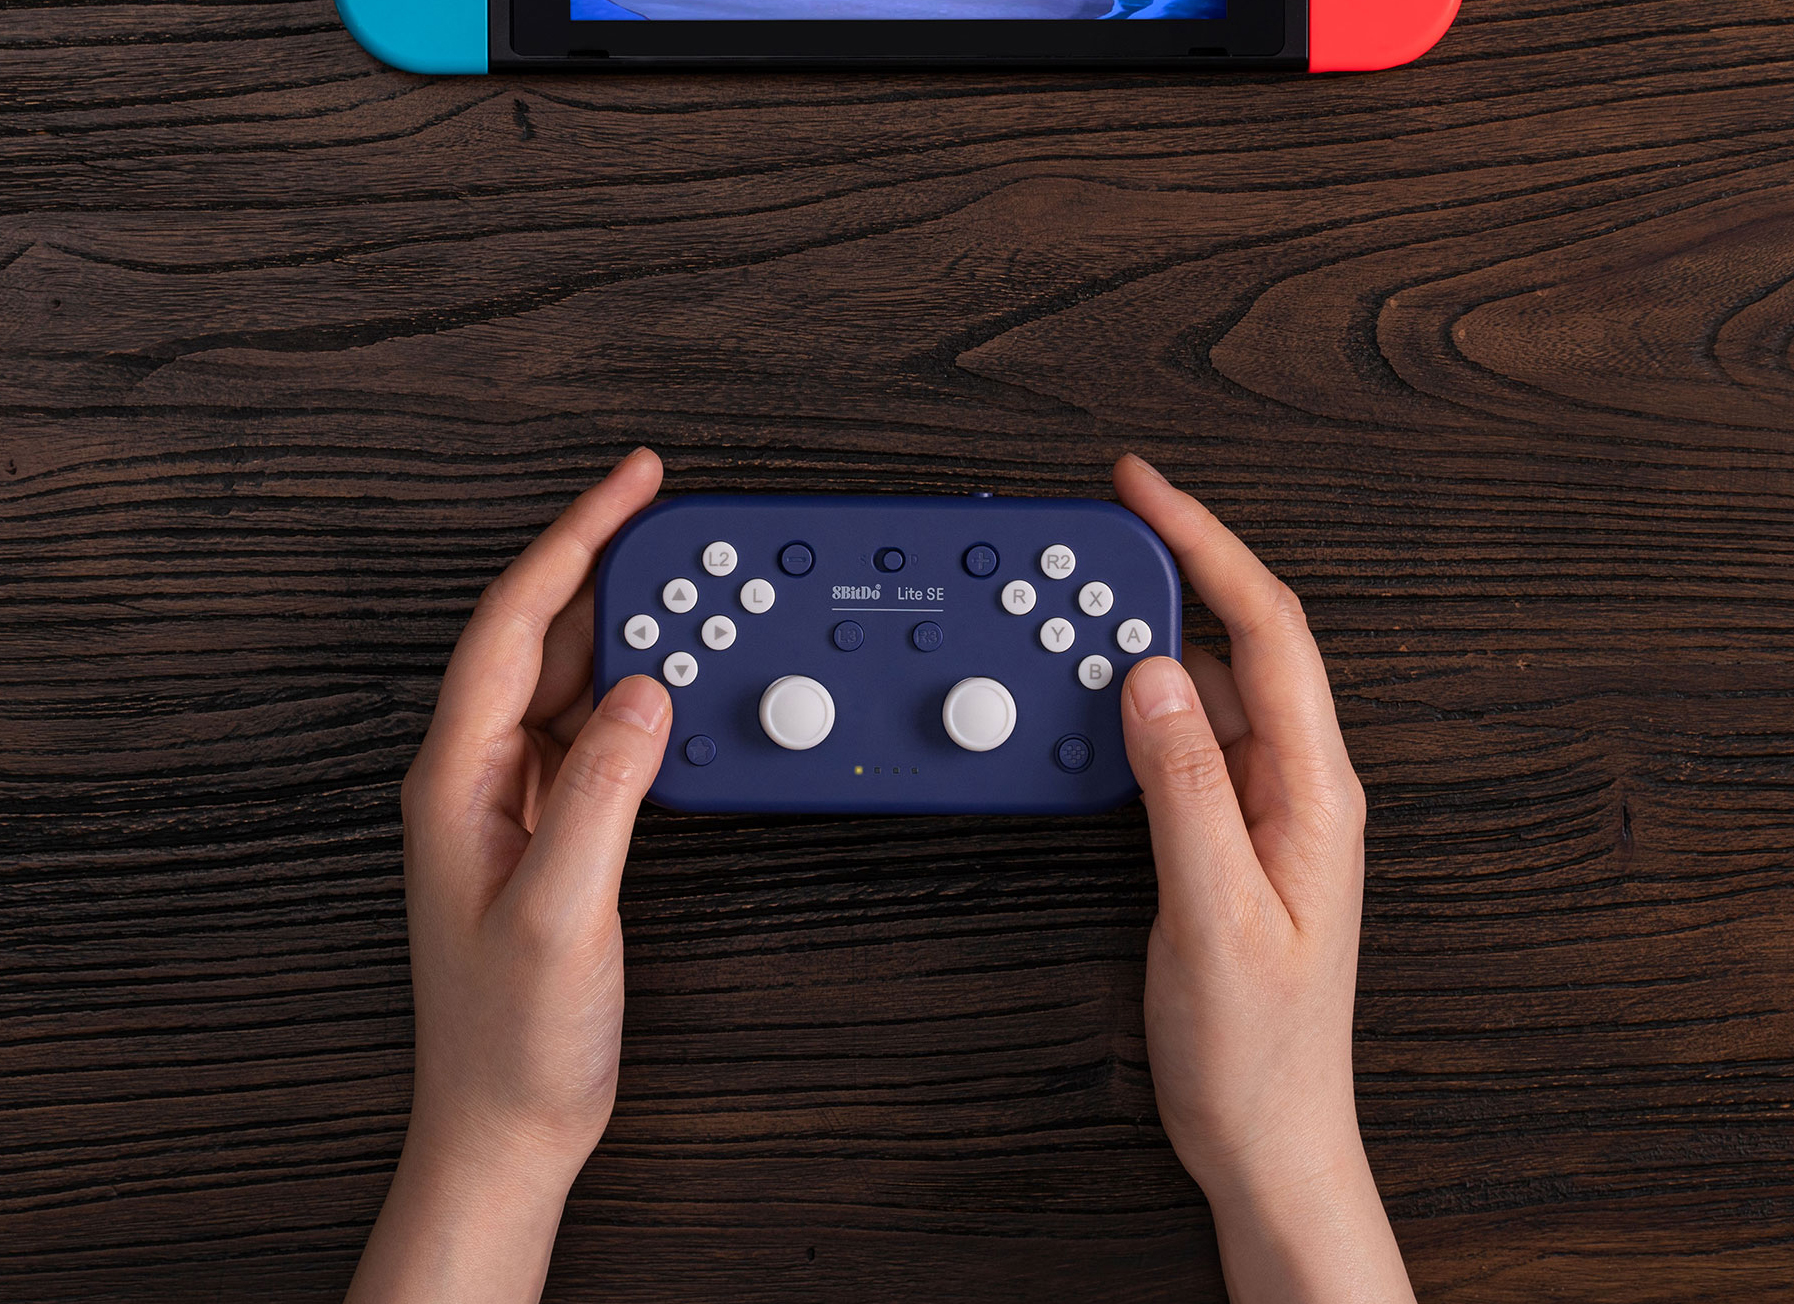 Android/Mac/PC/Switch/NES and SNES Classic C Edition Geek Theory 8Bitdo N30 Pro 2 Controller Bundle Updated 2018 Version - Includes BONUS Carrying Case 